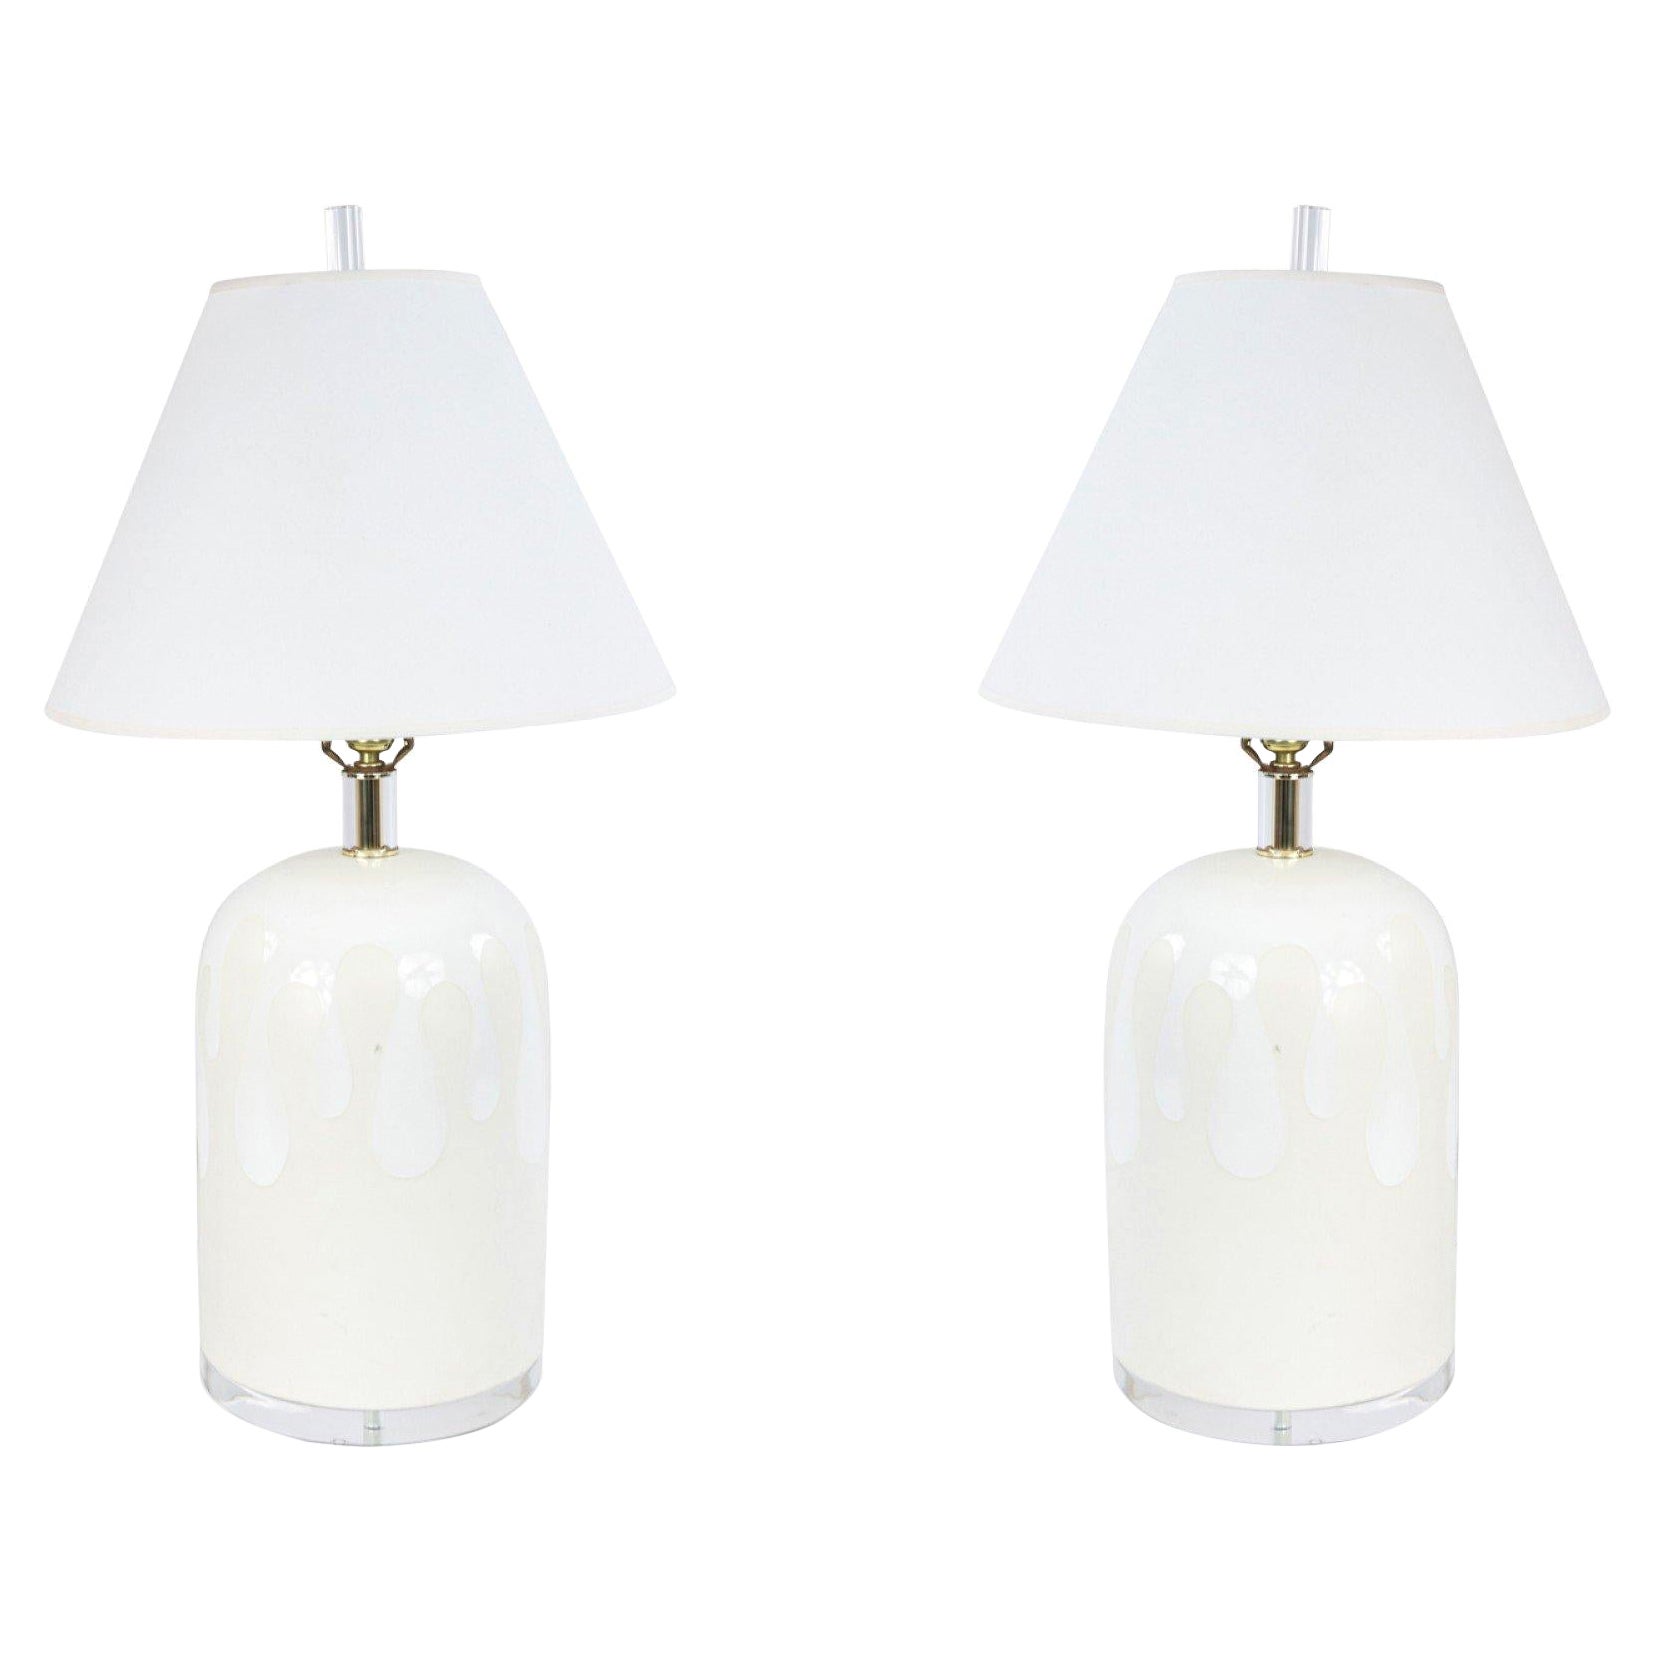 Pair of Mid-Century White Ceramic Table Lamps with Drip Design For Sale